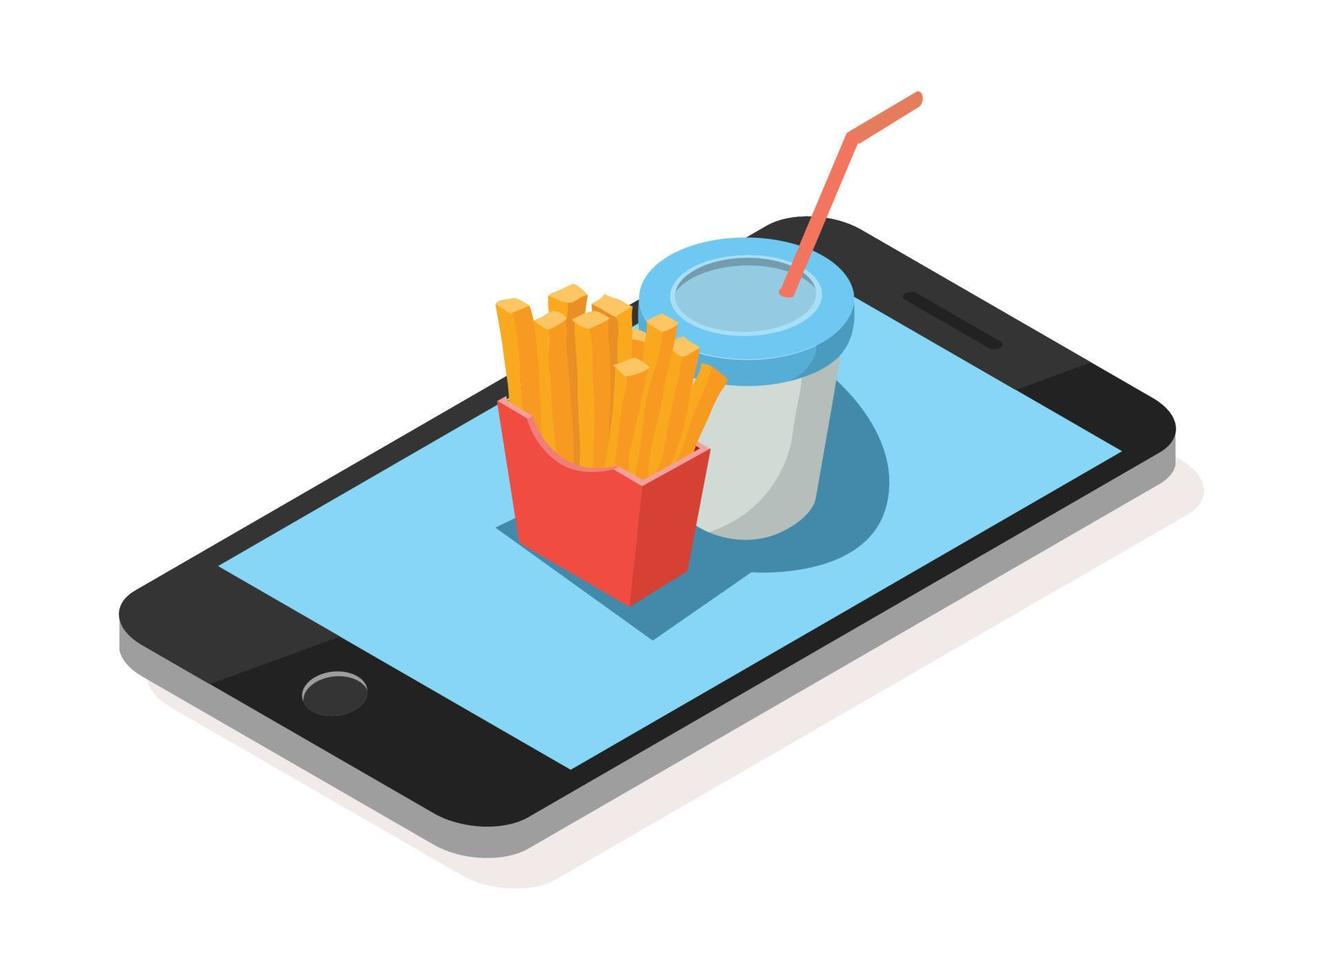 3D Isometric Flat Vector Concept of, Restaurant and Cafe Online Food Order App with Smartphone.  Suitable for Diagrams, Infographics, And Other Graphic assets